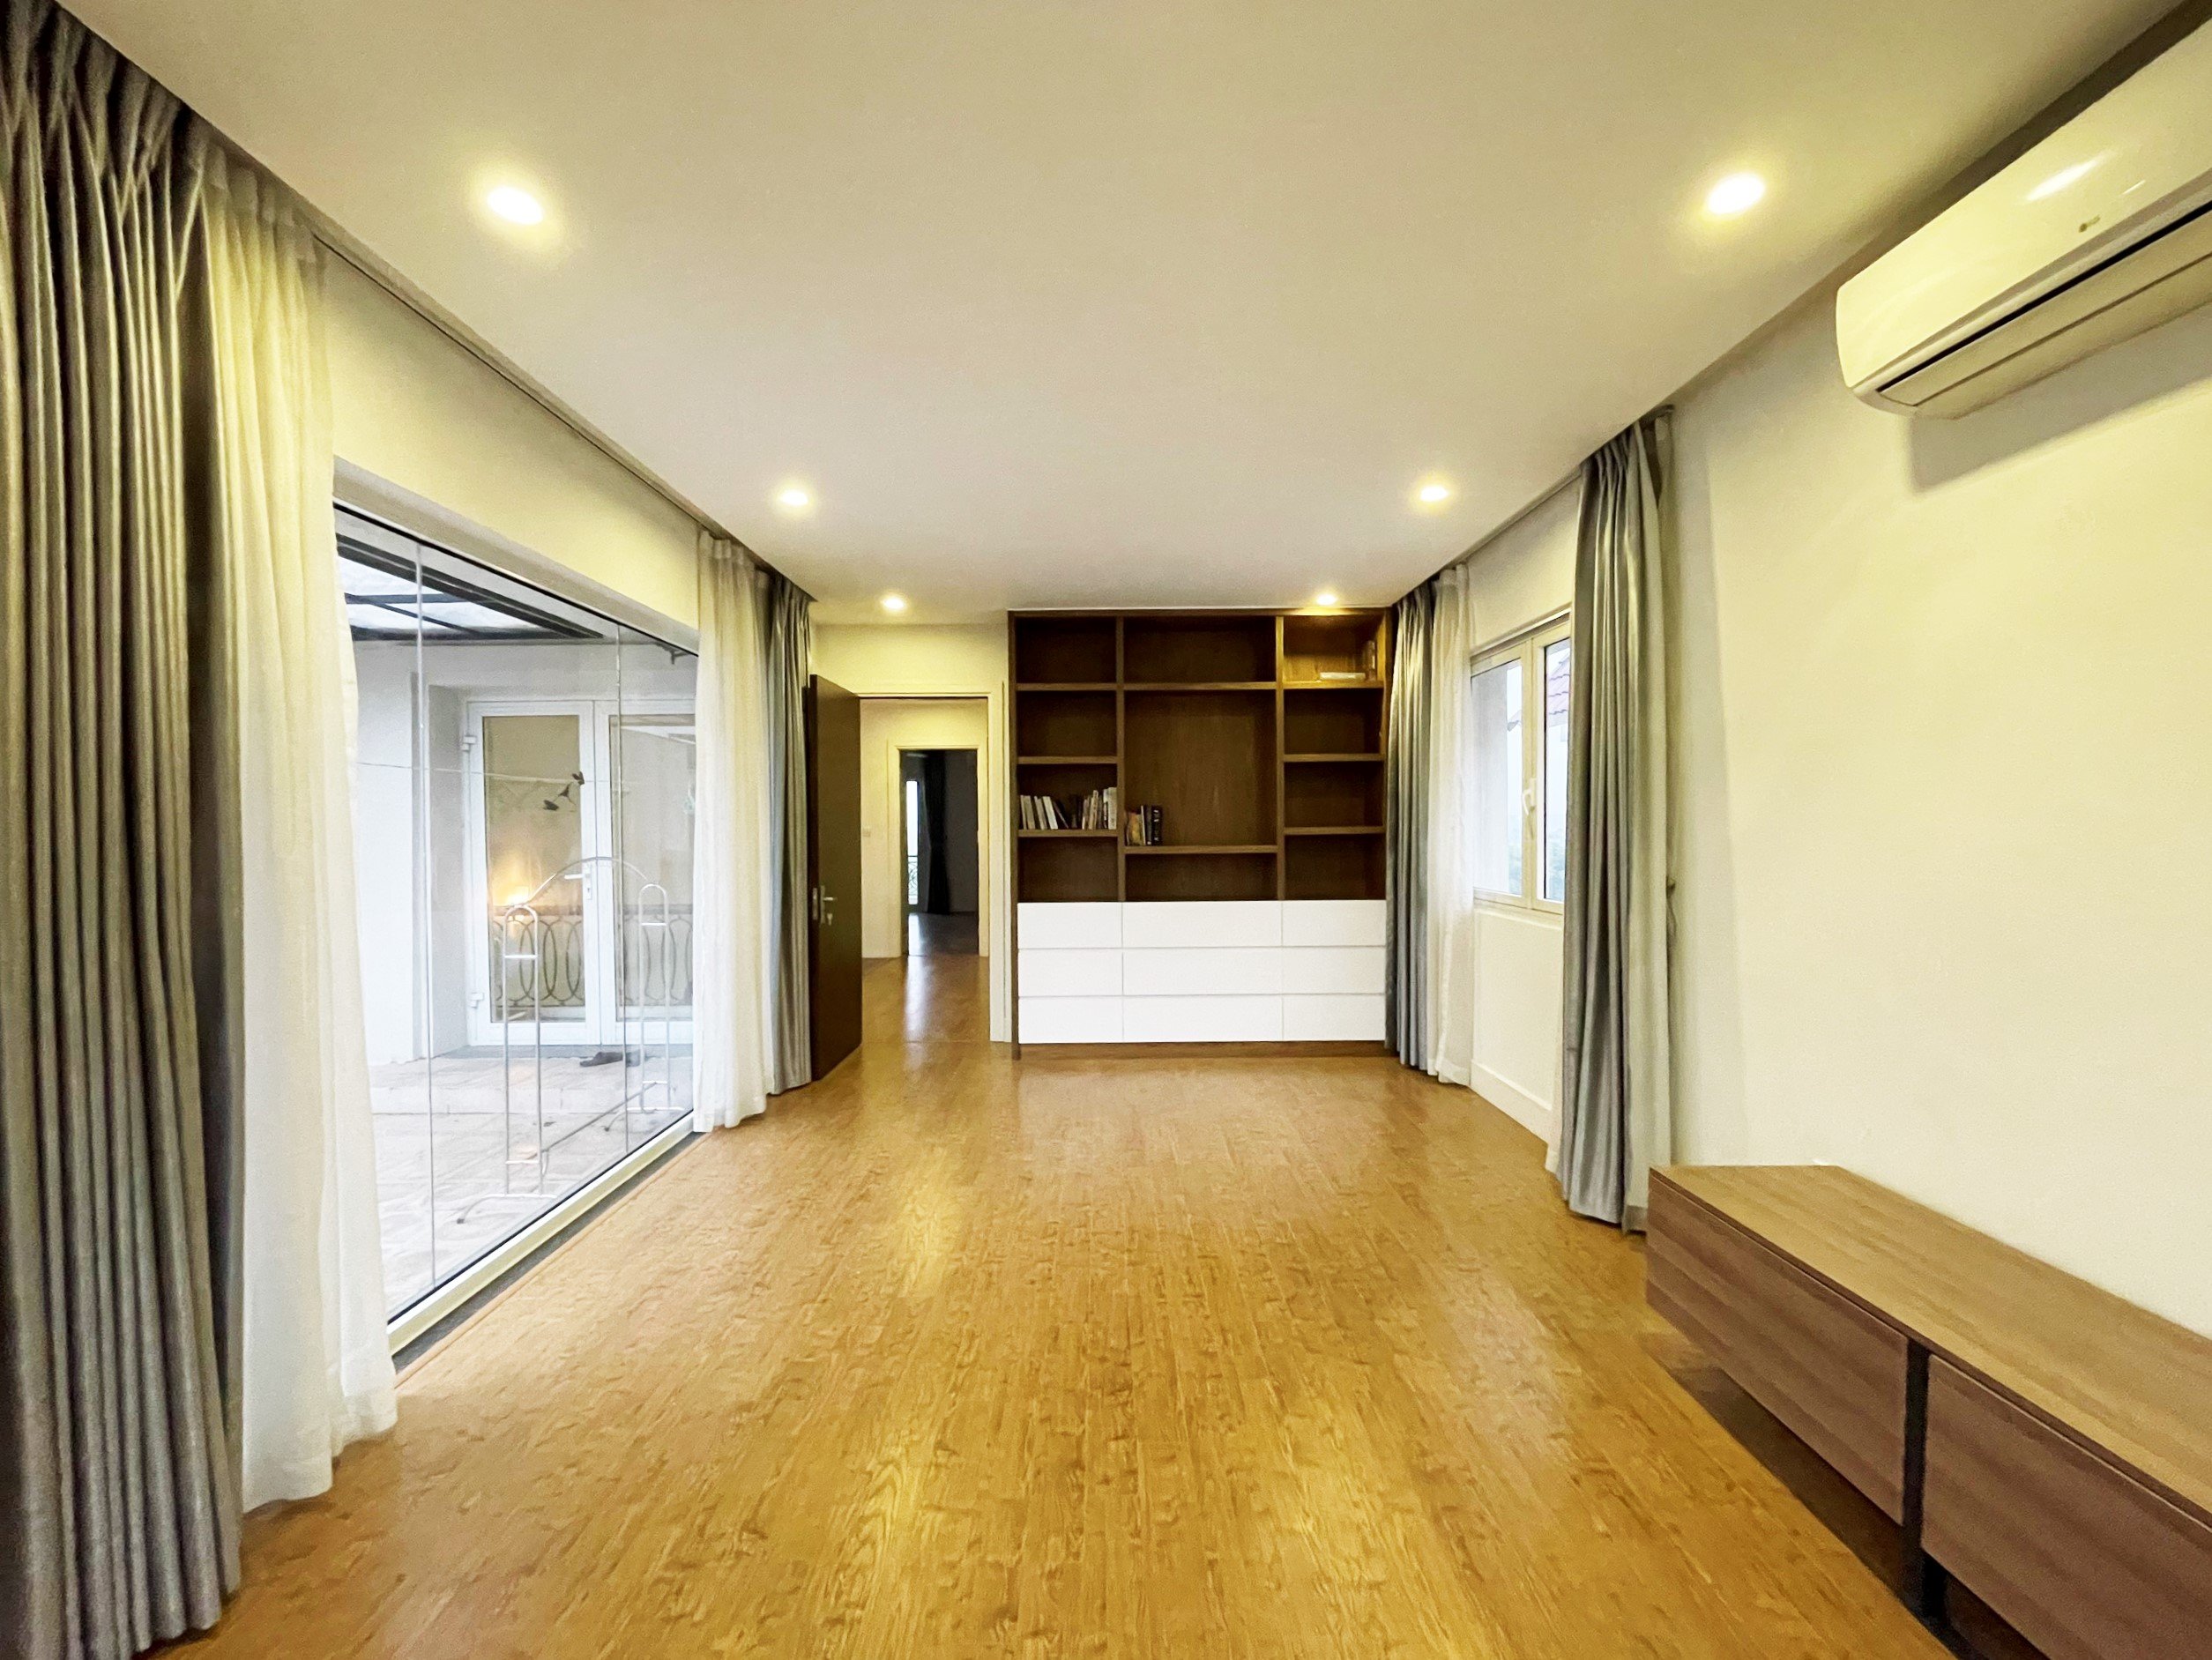 Reasonable Villa in Hoa Sua block, Vinhomes Riverside is Available for Rent now 16